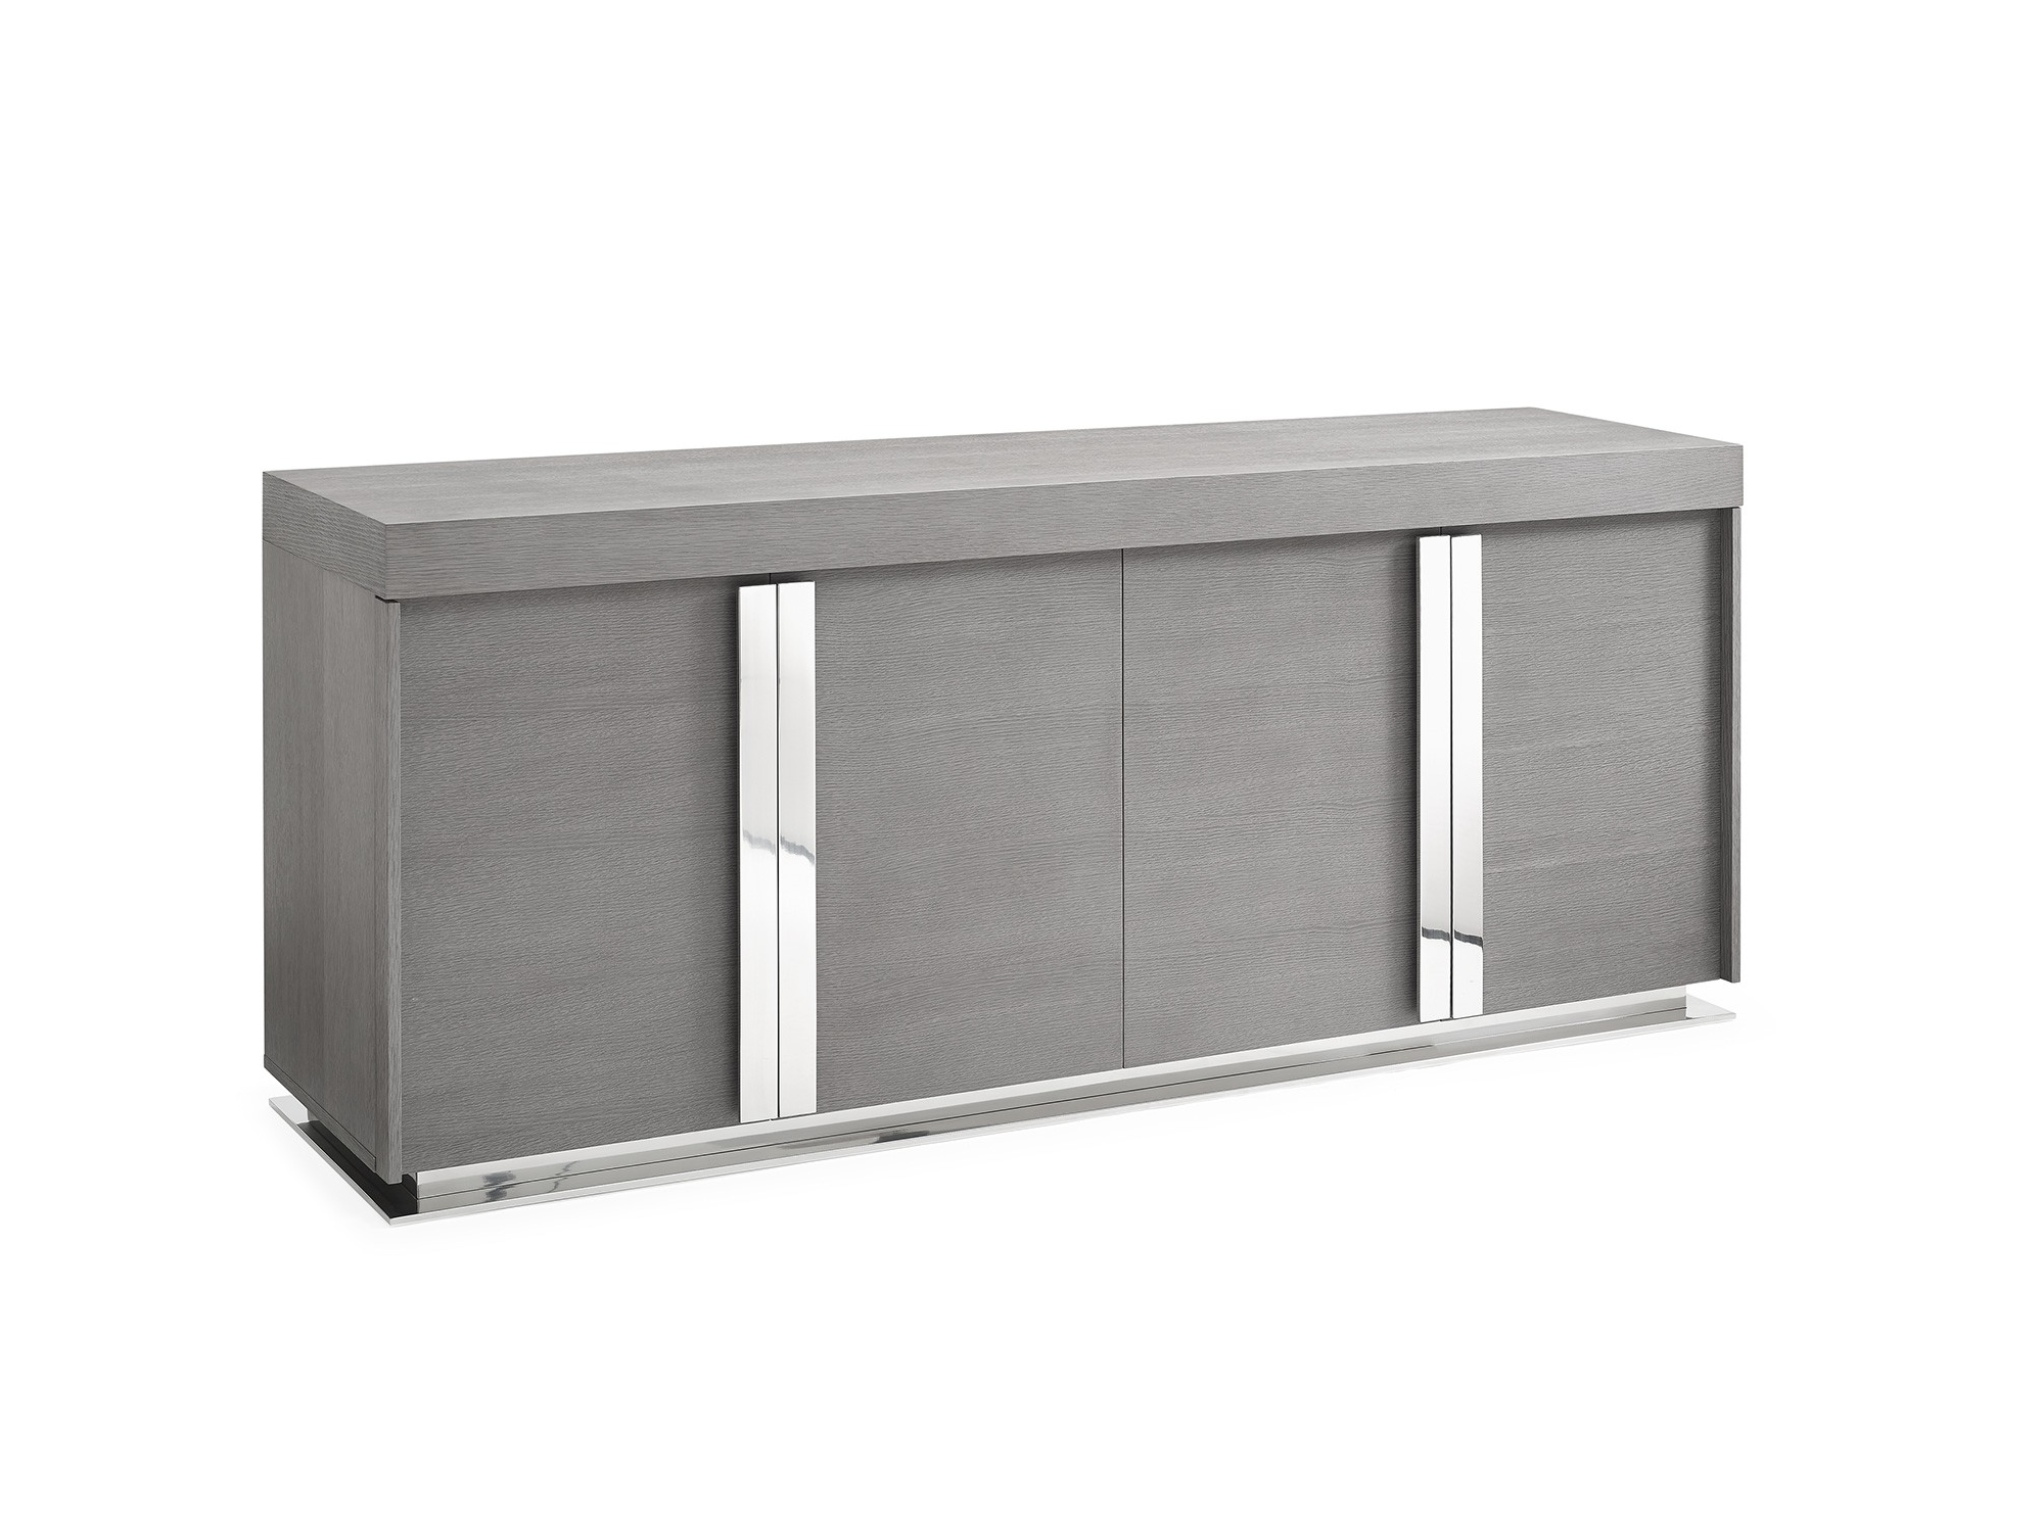 Elite Gray Oak Buffet with Stainless Steel Accents